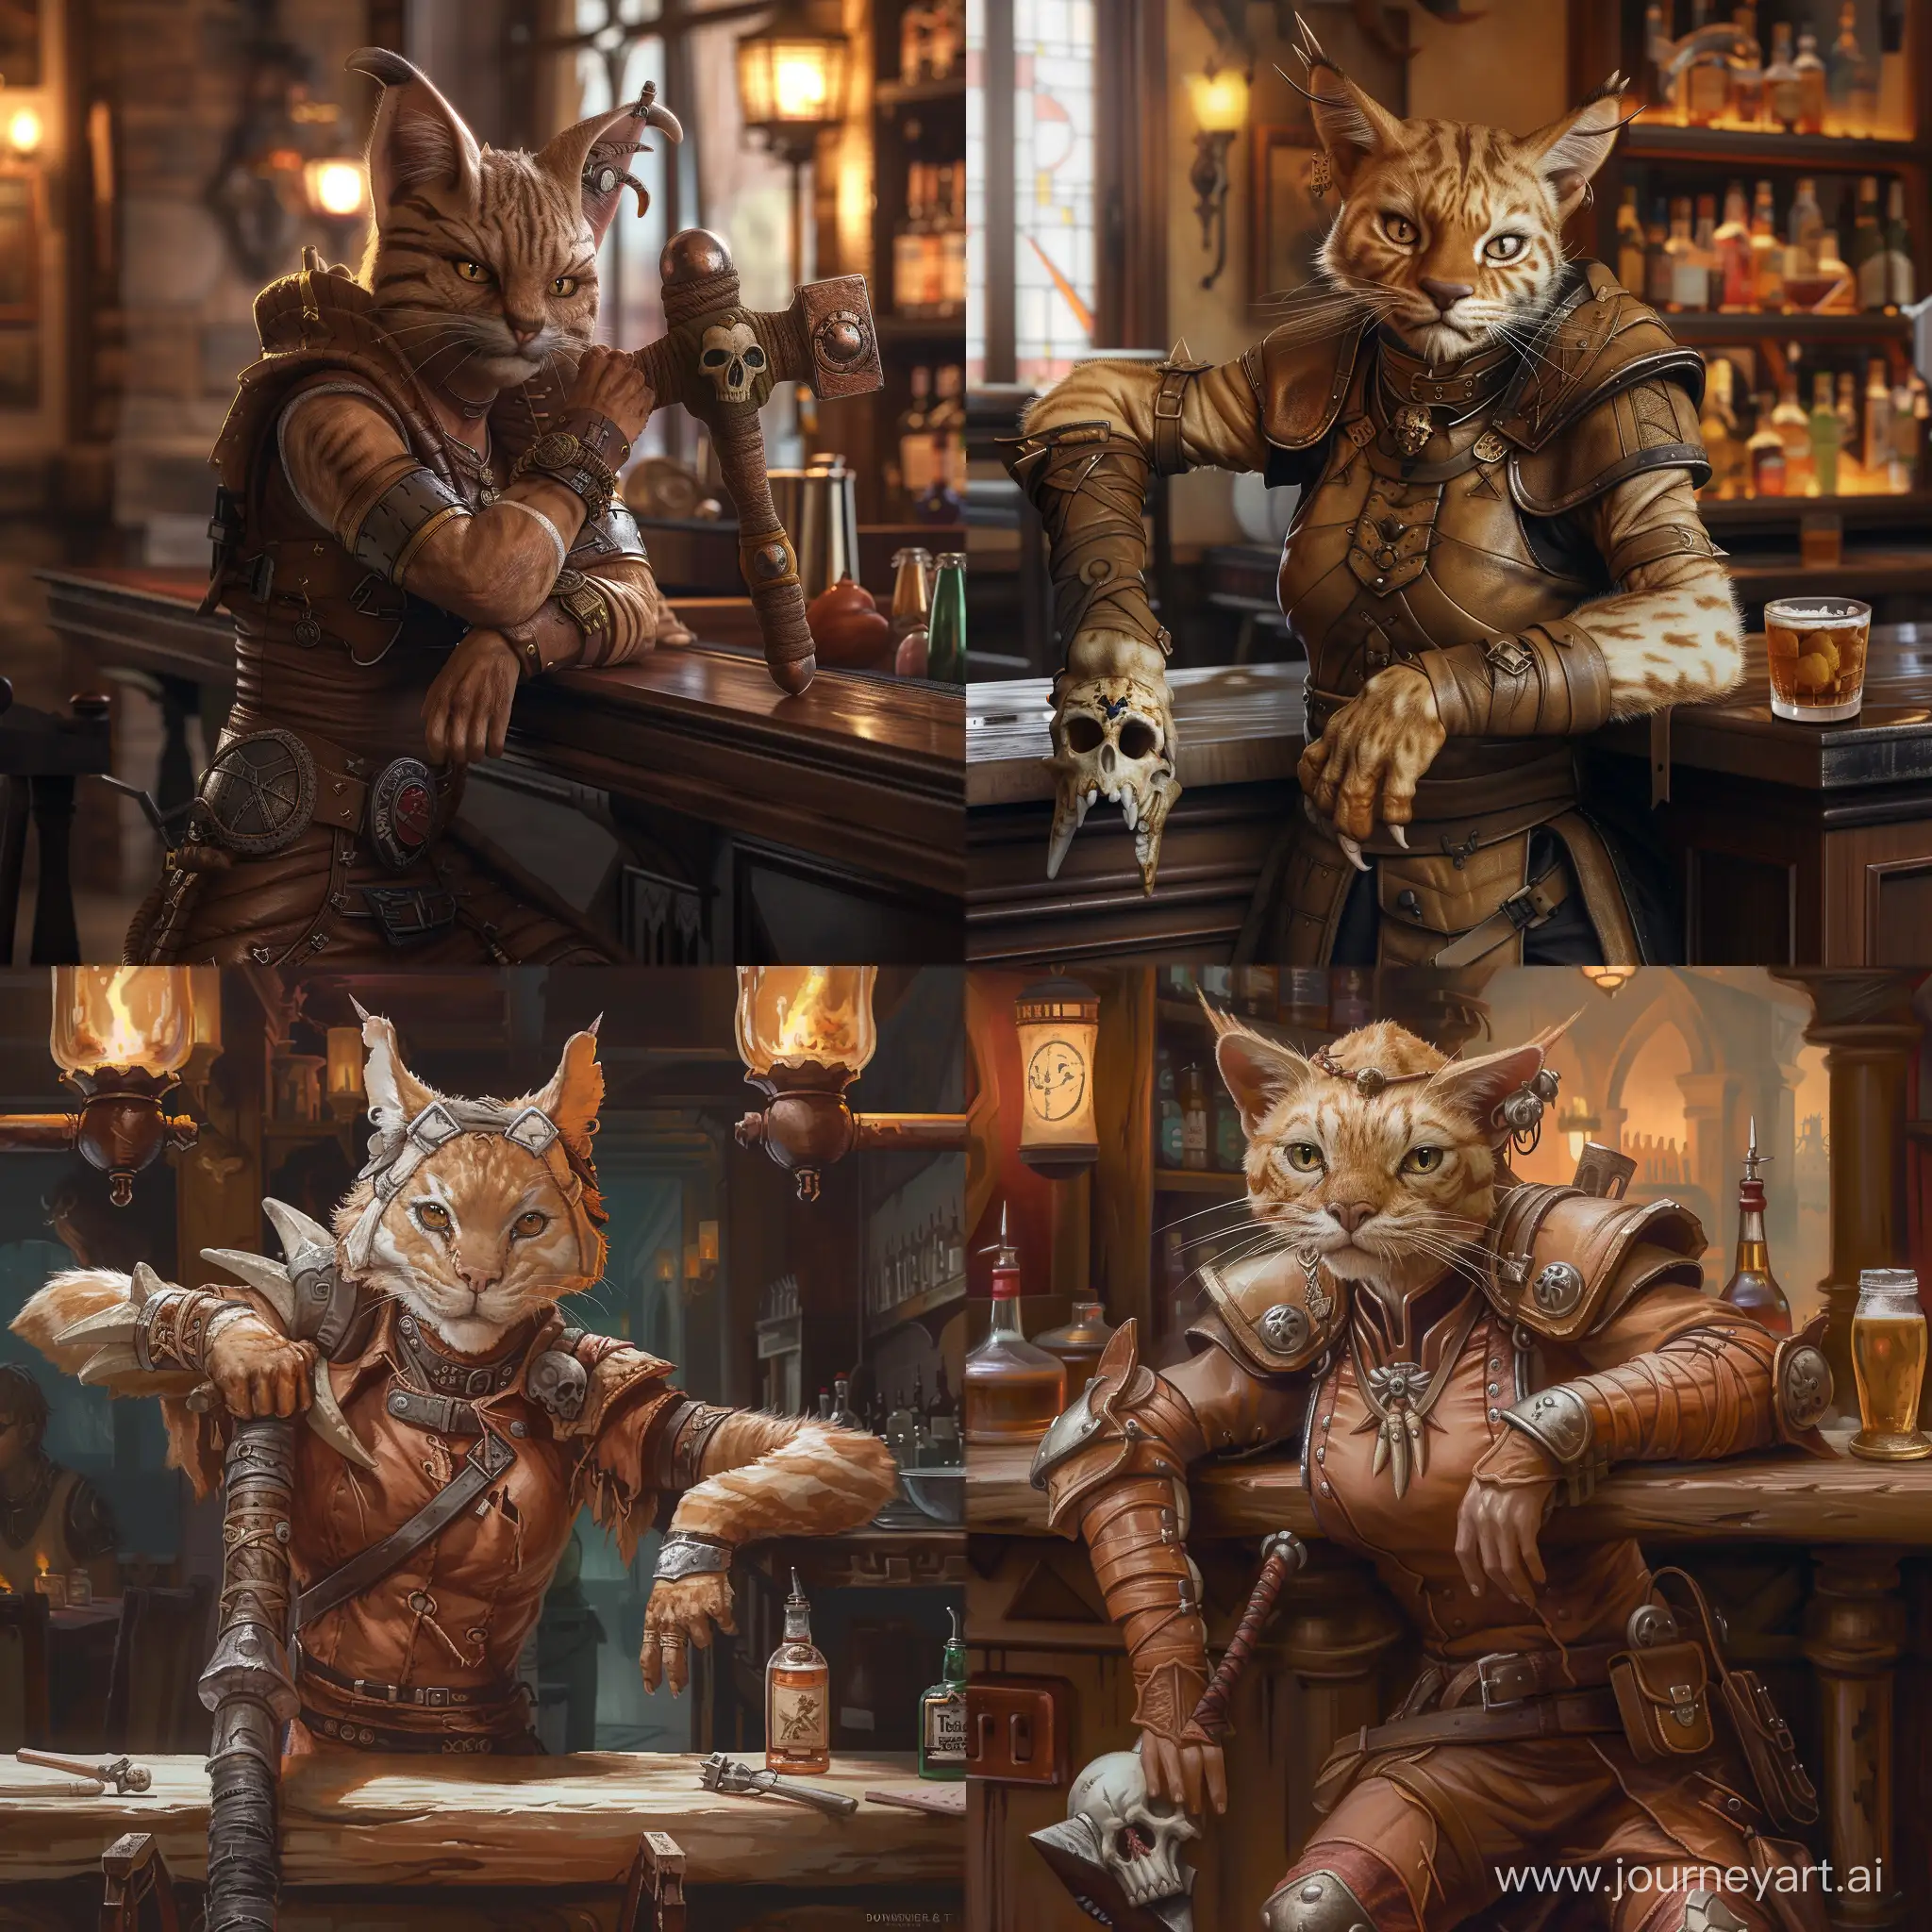 Tabaxi-Girl-in-Leather-Armor-Leaning-on-Bar-with-Skull-War-Hammer